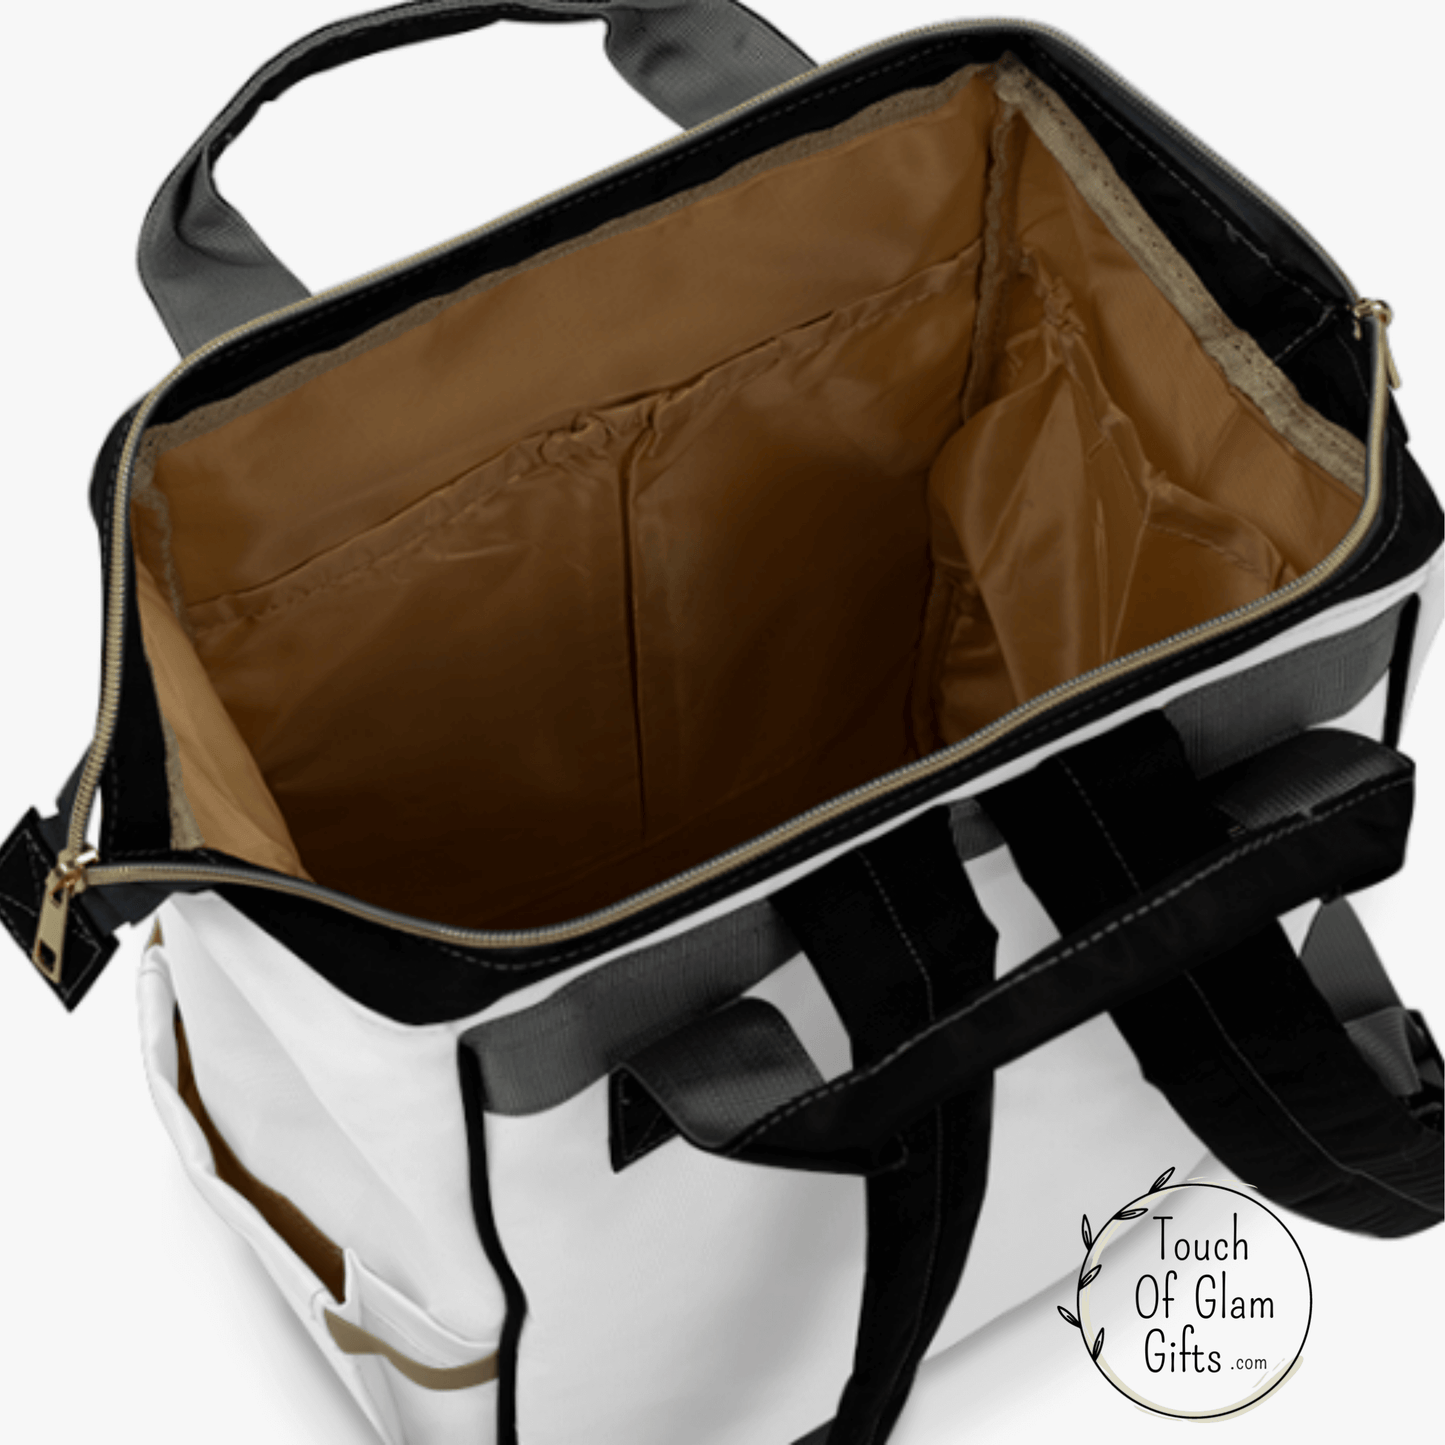 The inside of all of our diaper bags is nice and large and will fit a lap top and has many storage pockets for separating your stuff. The bag stands up on its own and the zipper covers the main compartment.